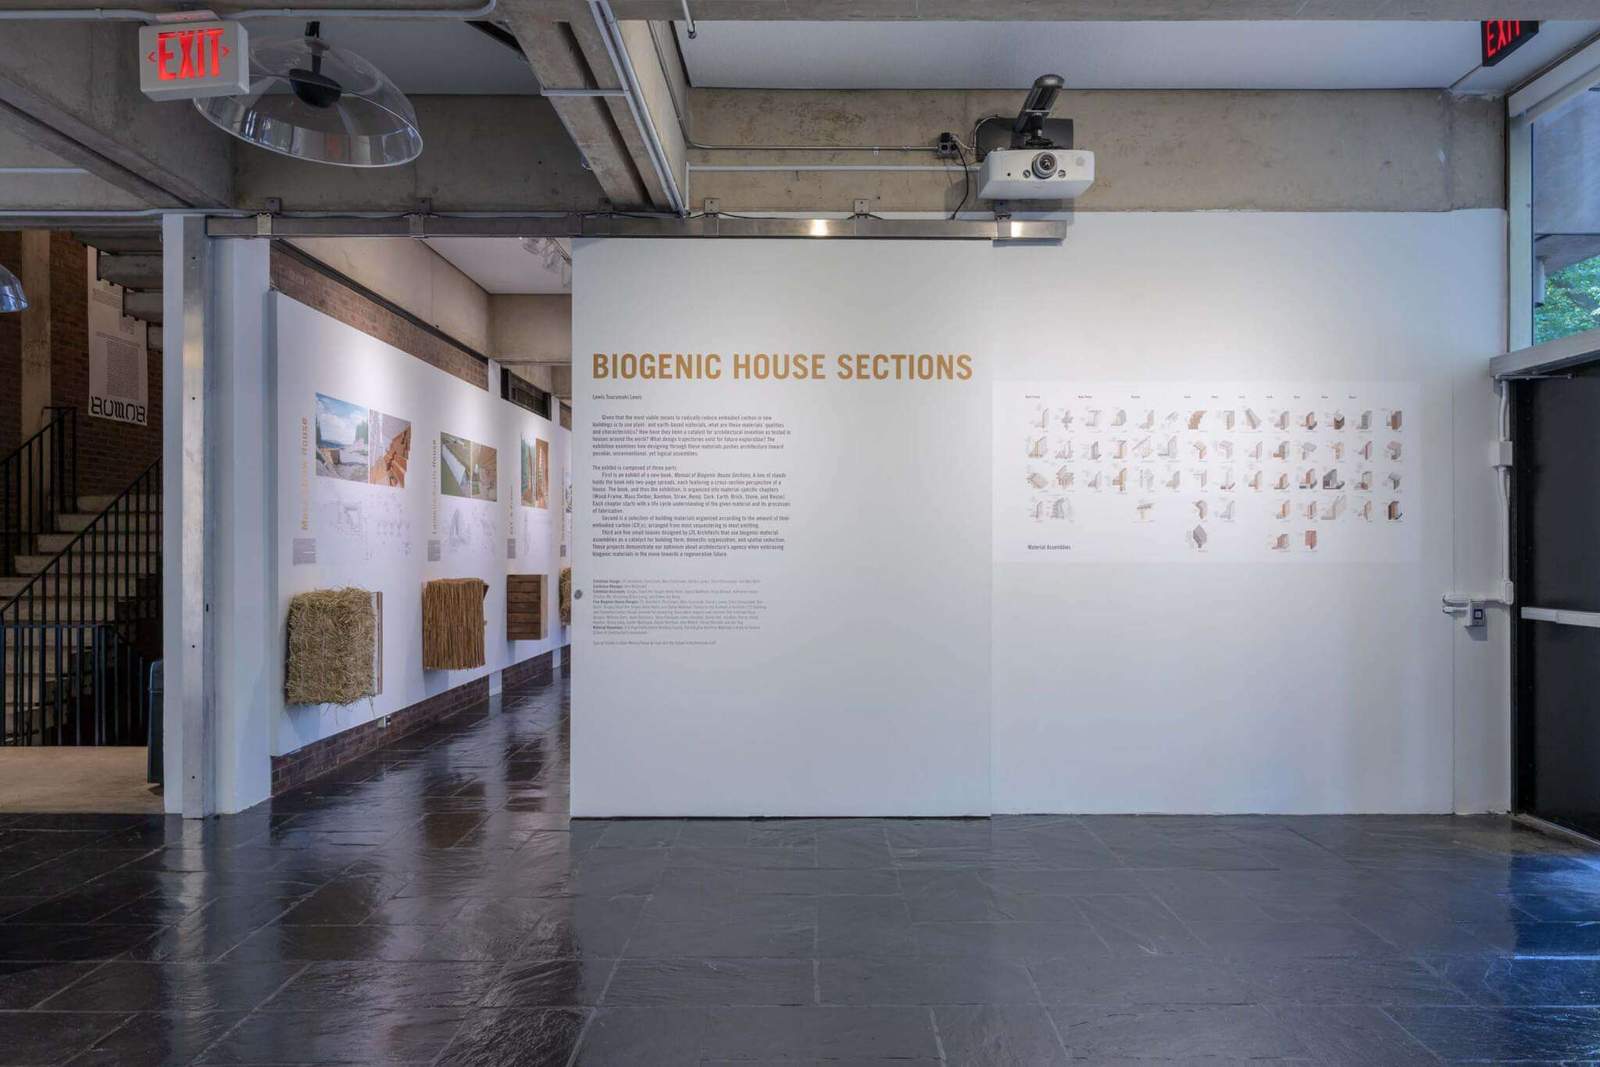 Biogenic House Sections, curated by LTL Architects, explores case studies and speculative designs that use natural materials